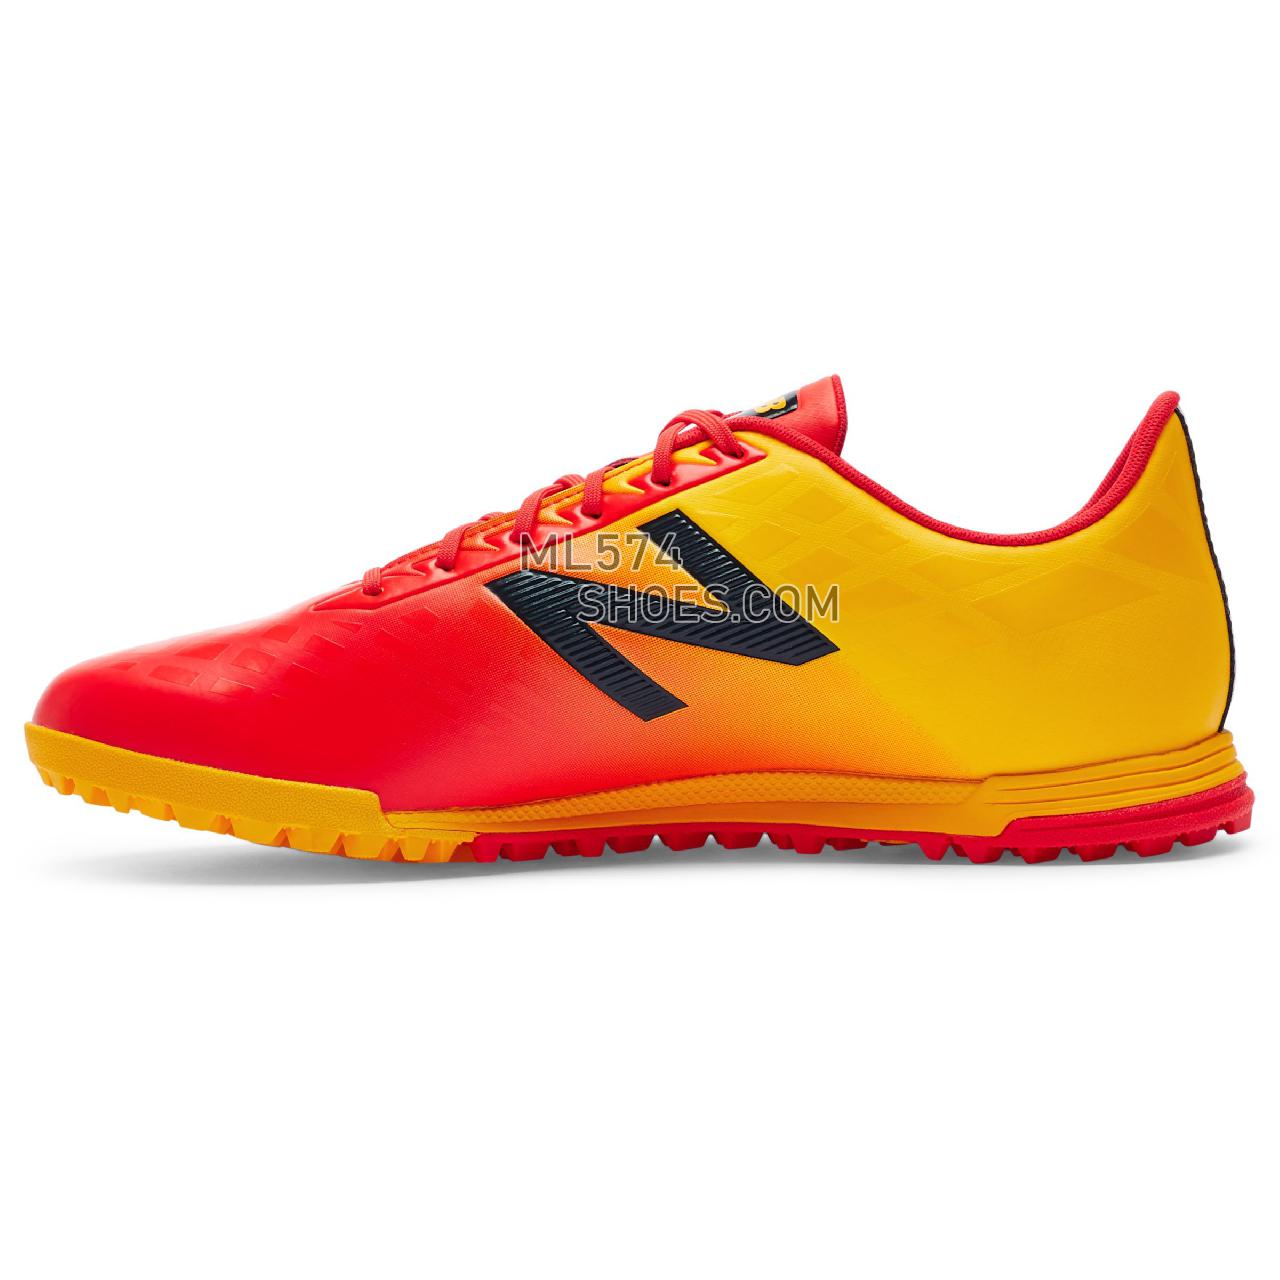 New Balance Furon v4 Dispatch TF - Men's 4 - Soccer Flame with Aztec Gold - MSFDTFA4